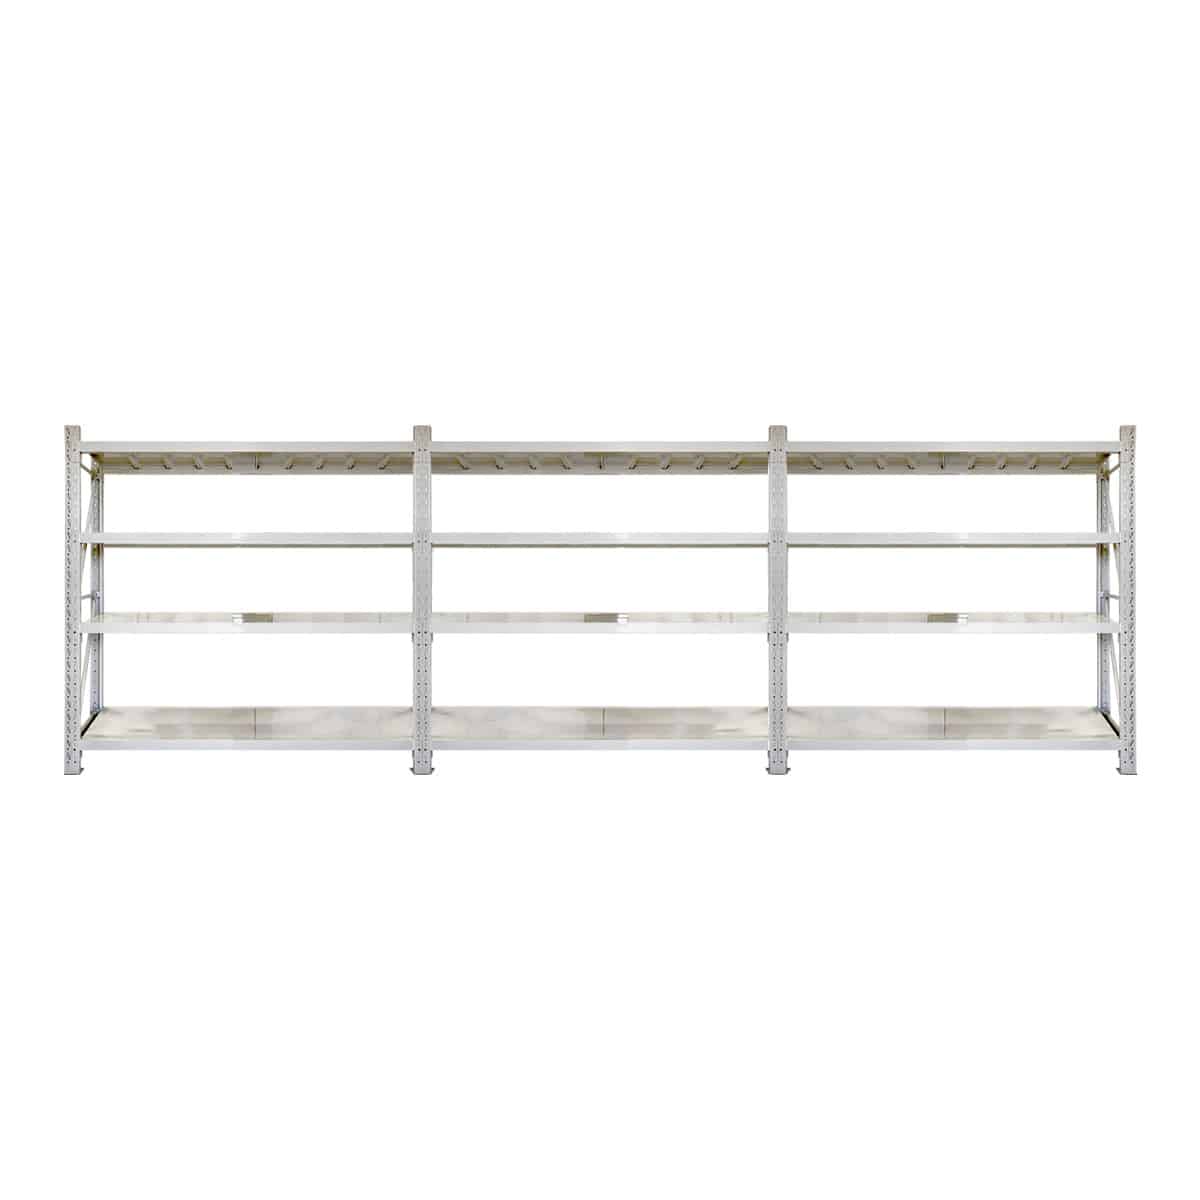 2m (H) x 6m (W) x 0.6m (D) 2400kg Garage Shelving For Shed